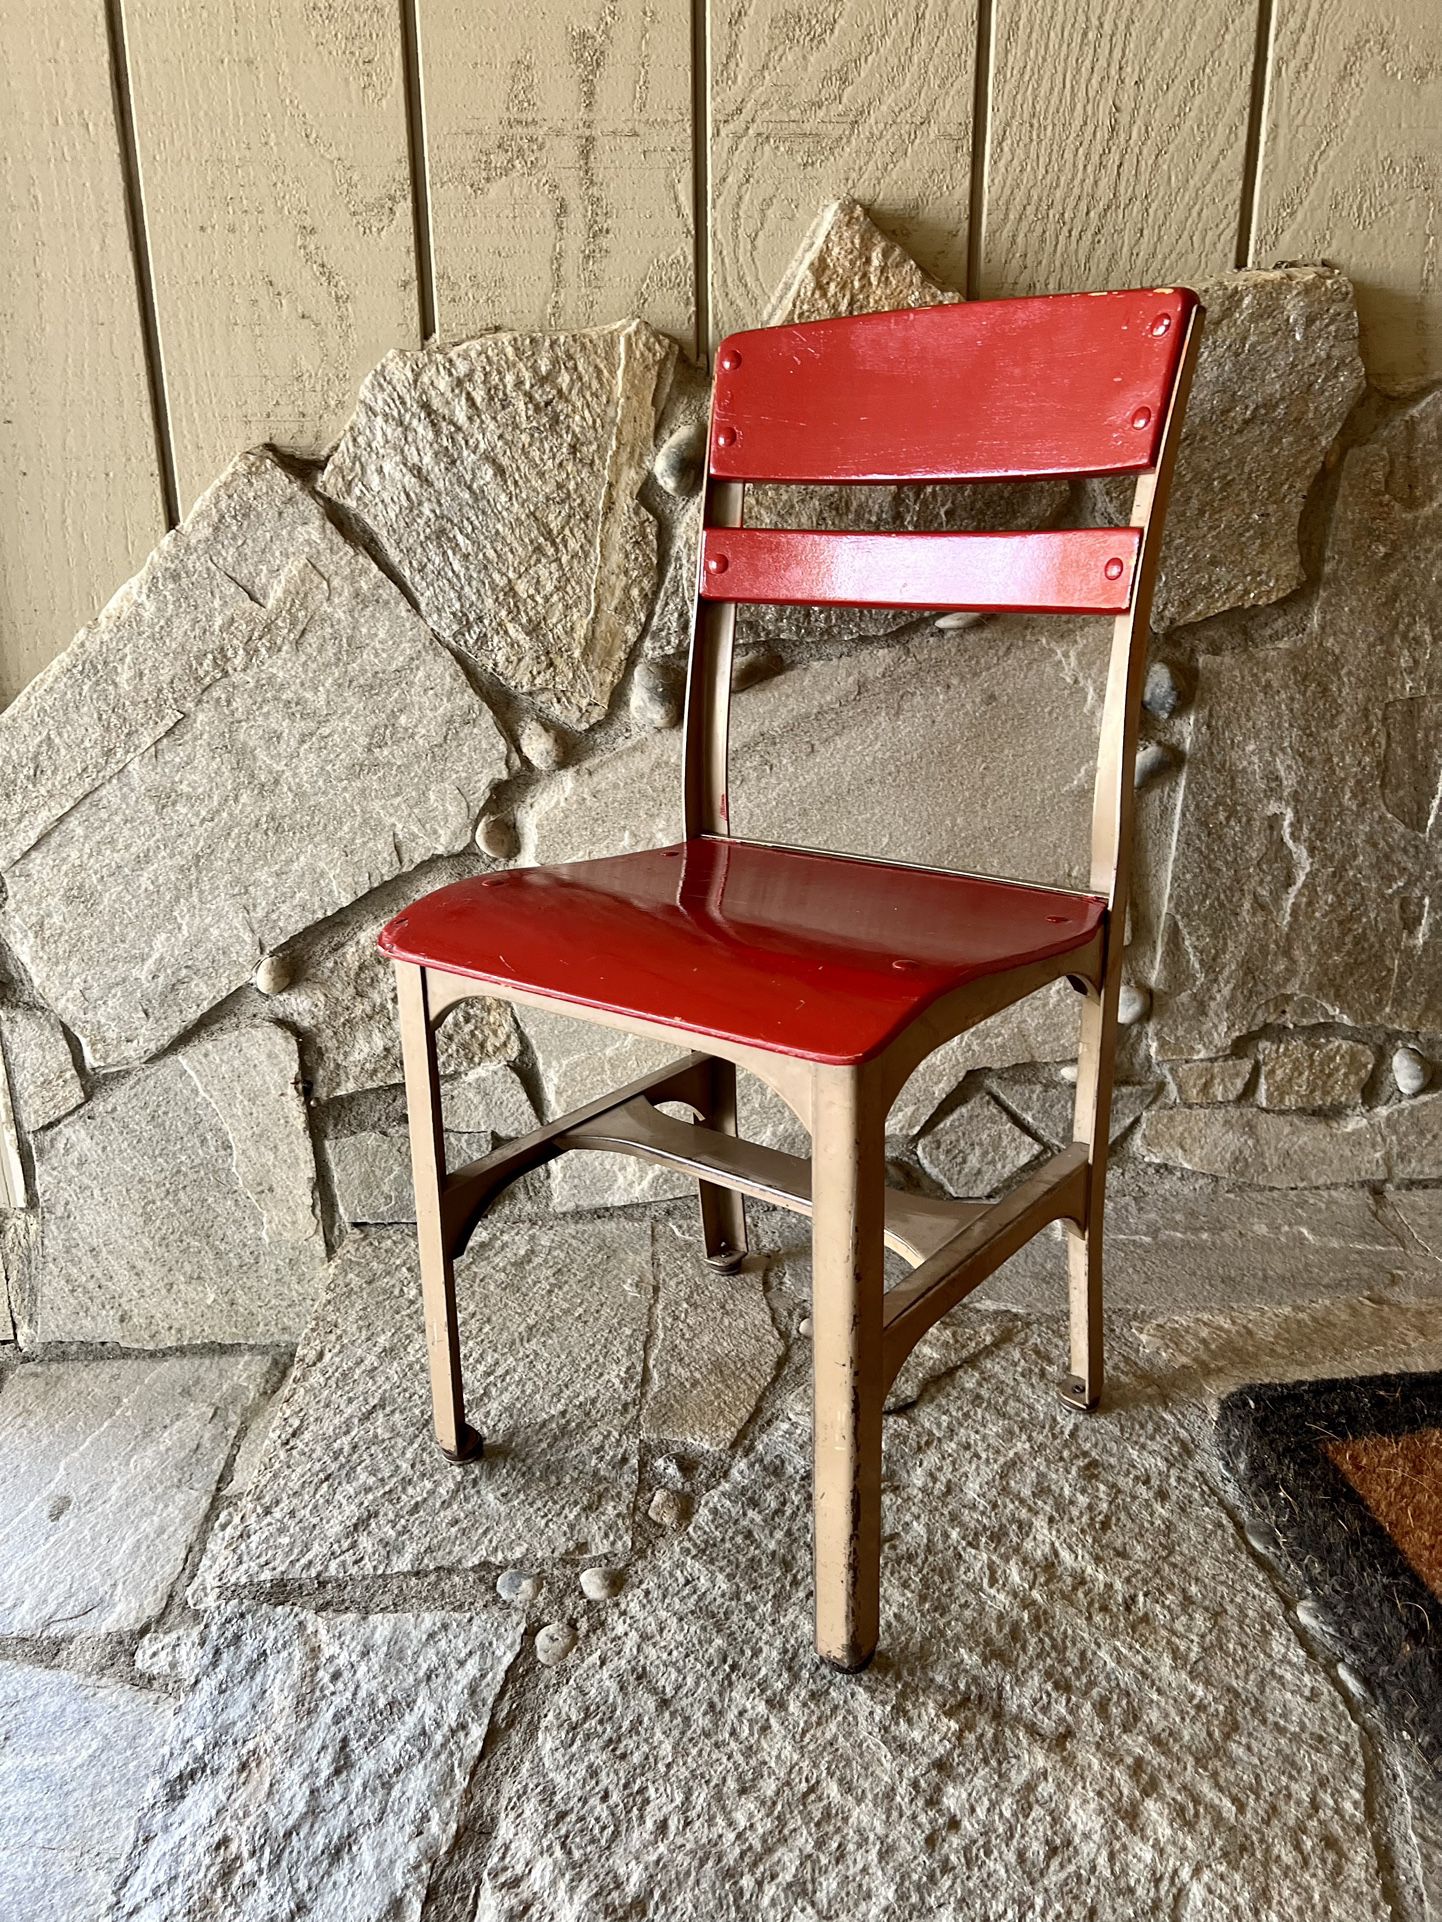 Vintage Child’s School Chair Small Kids Photo Prop Wood and Steel